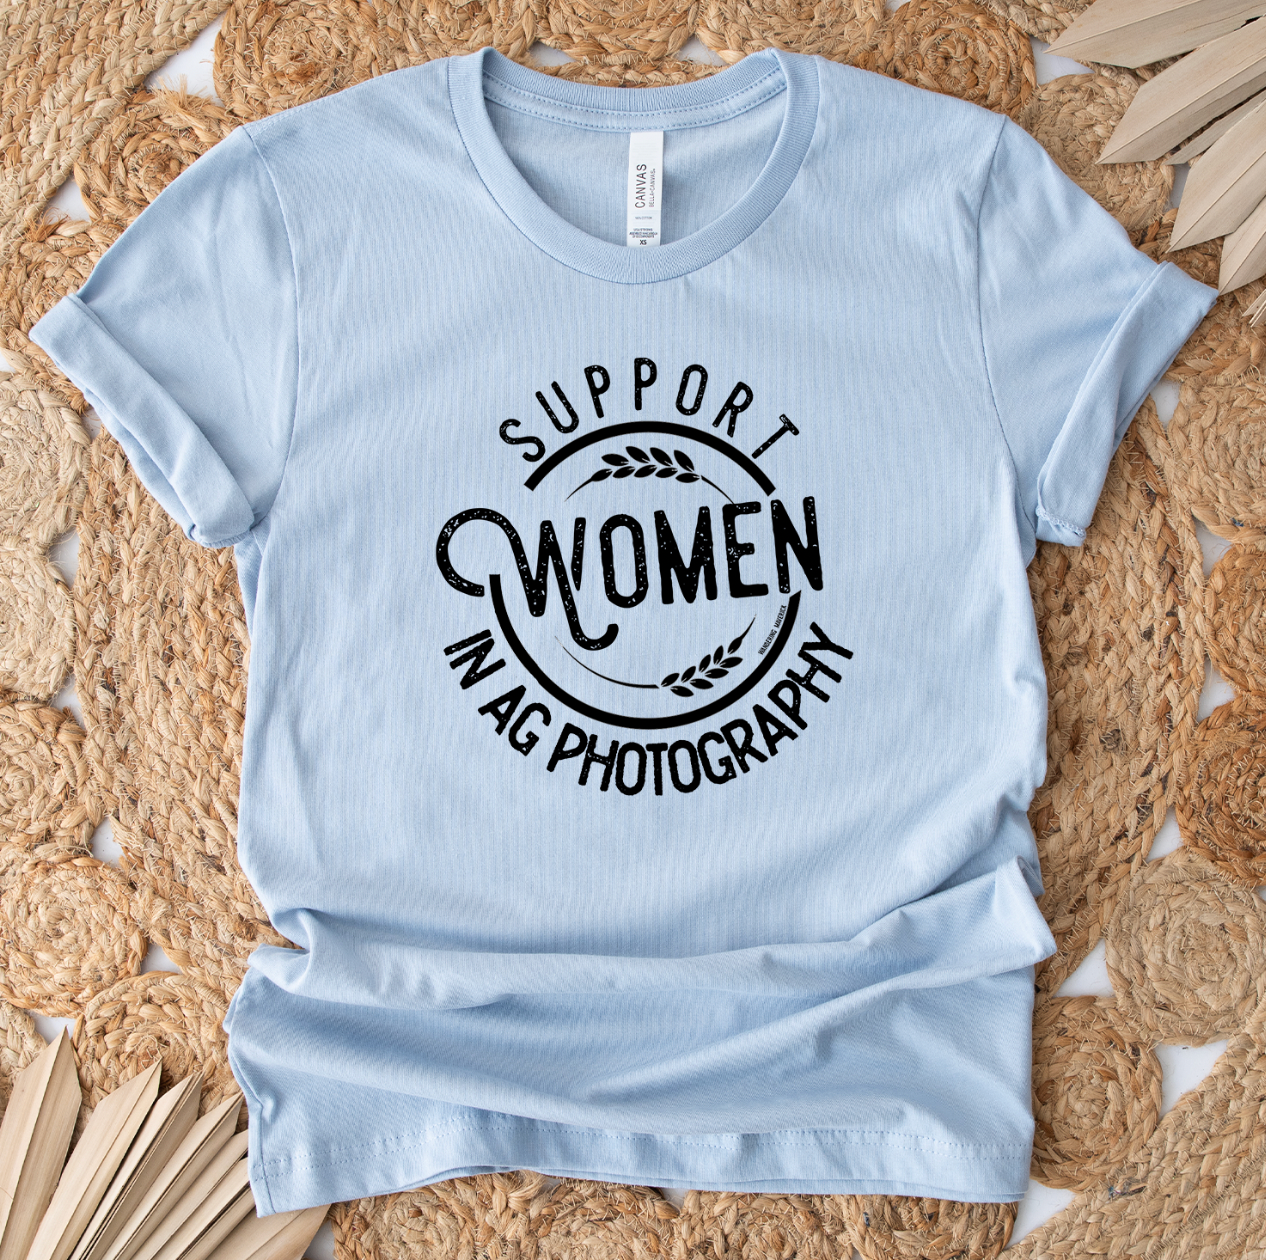 Support Women In Ag Photography T-Shirt (XS-4XL) - Multiple Colors!